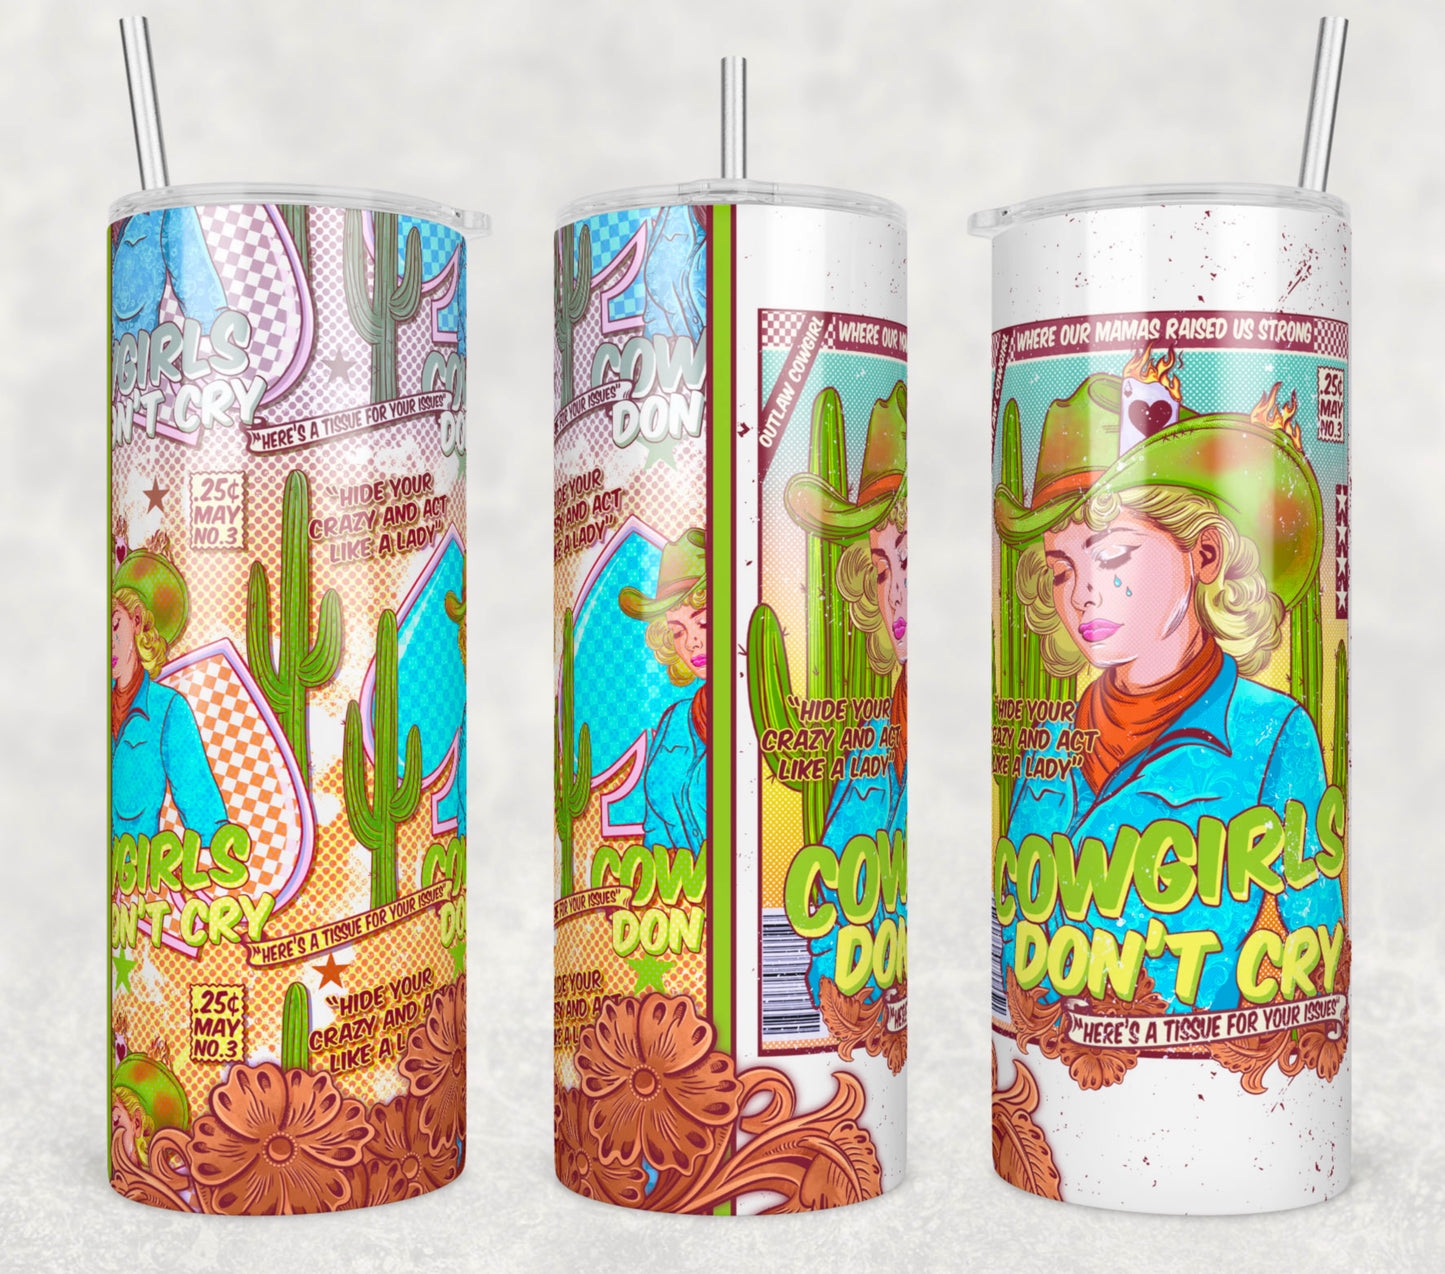 Cowgirls Don't Cry Insulated Tumbler with Plastic Lid and Sealed Reusable Straw | Trendy Music Cup | Hot/Cold Tumbler